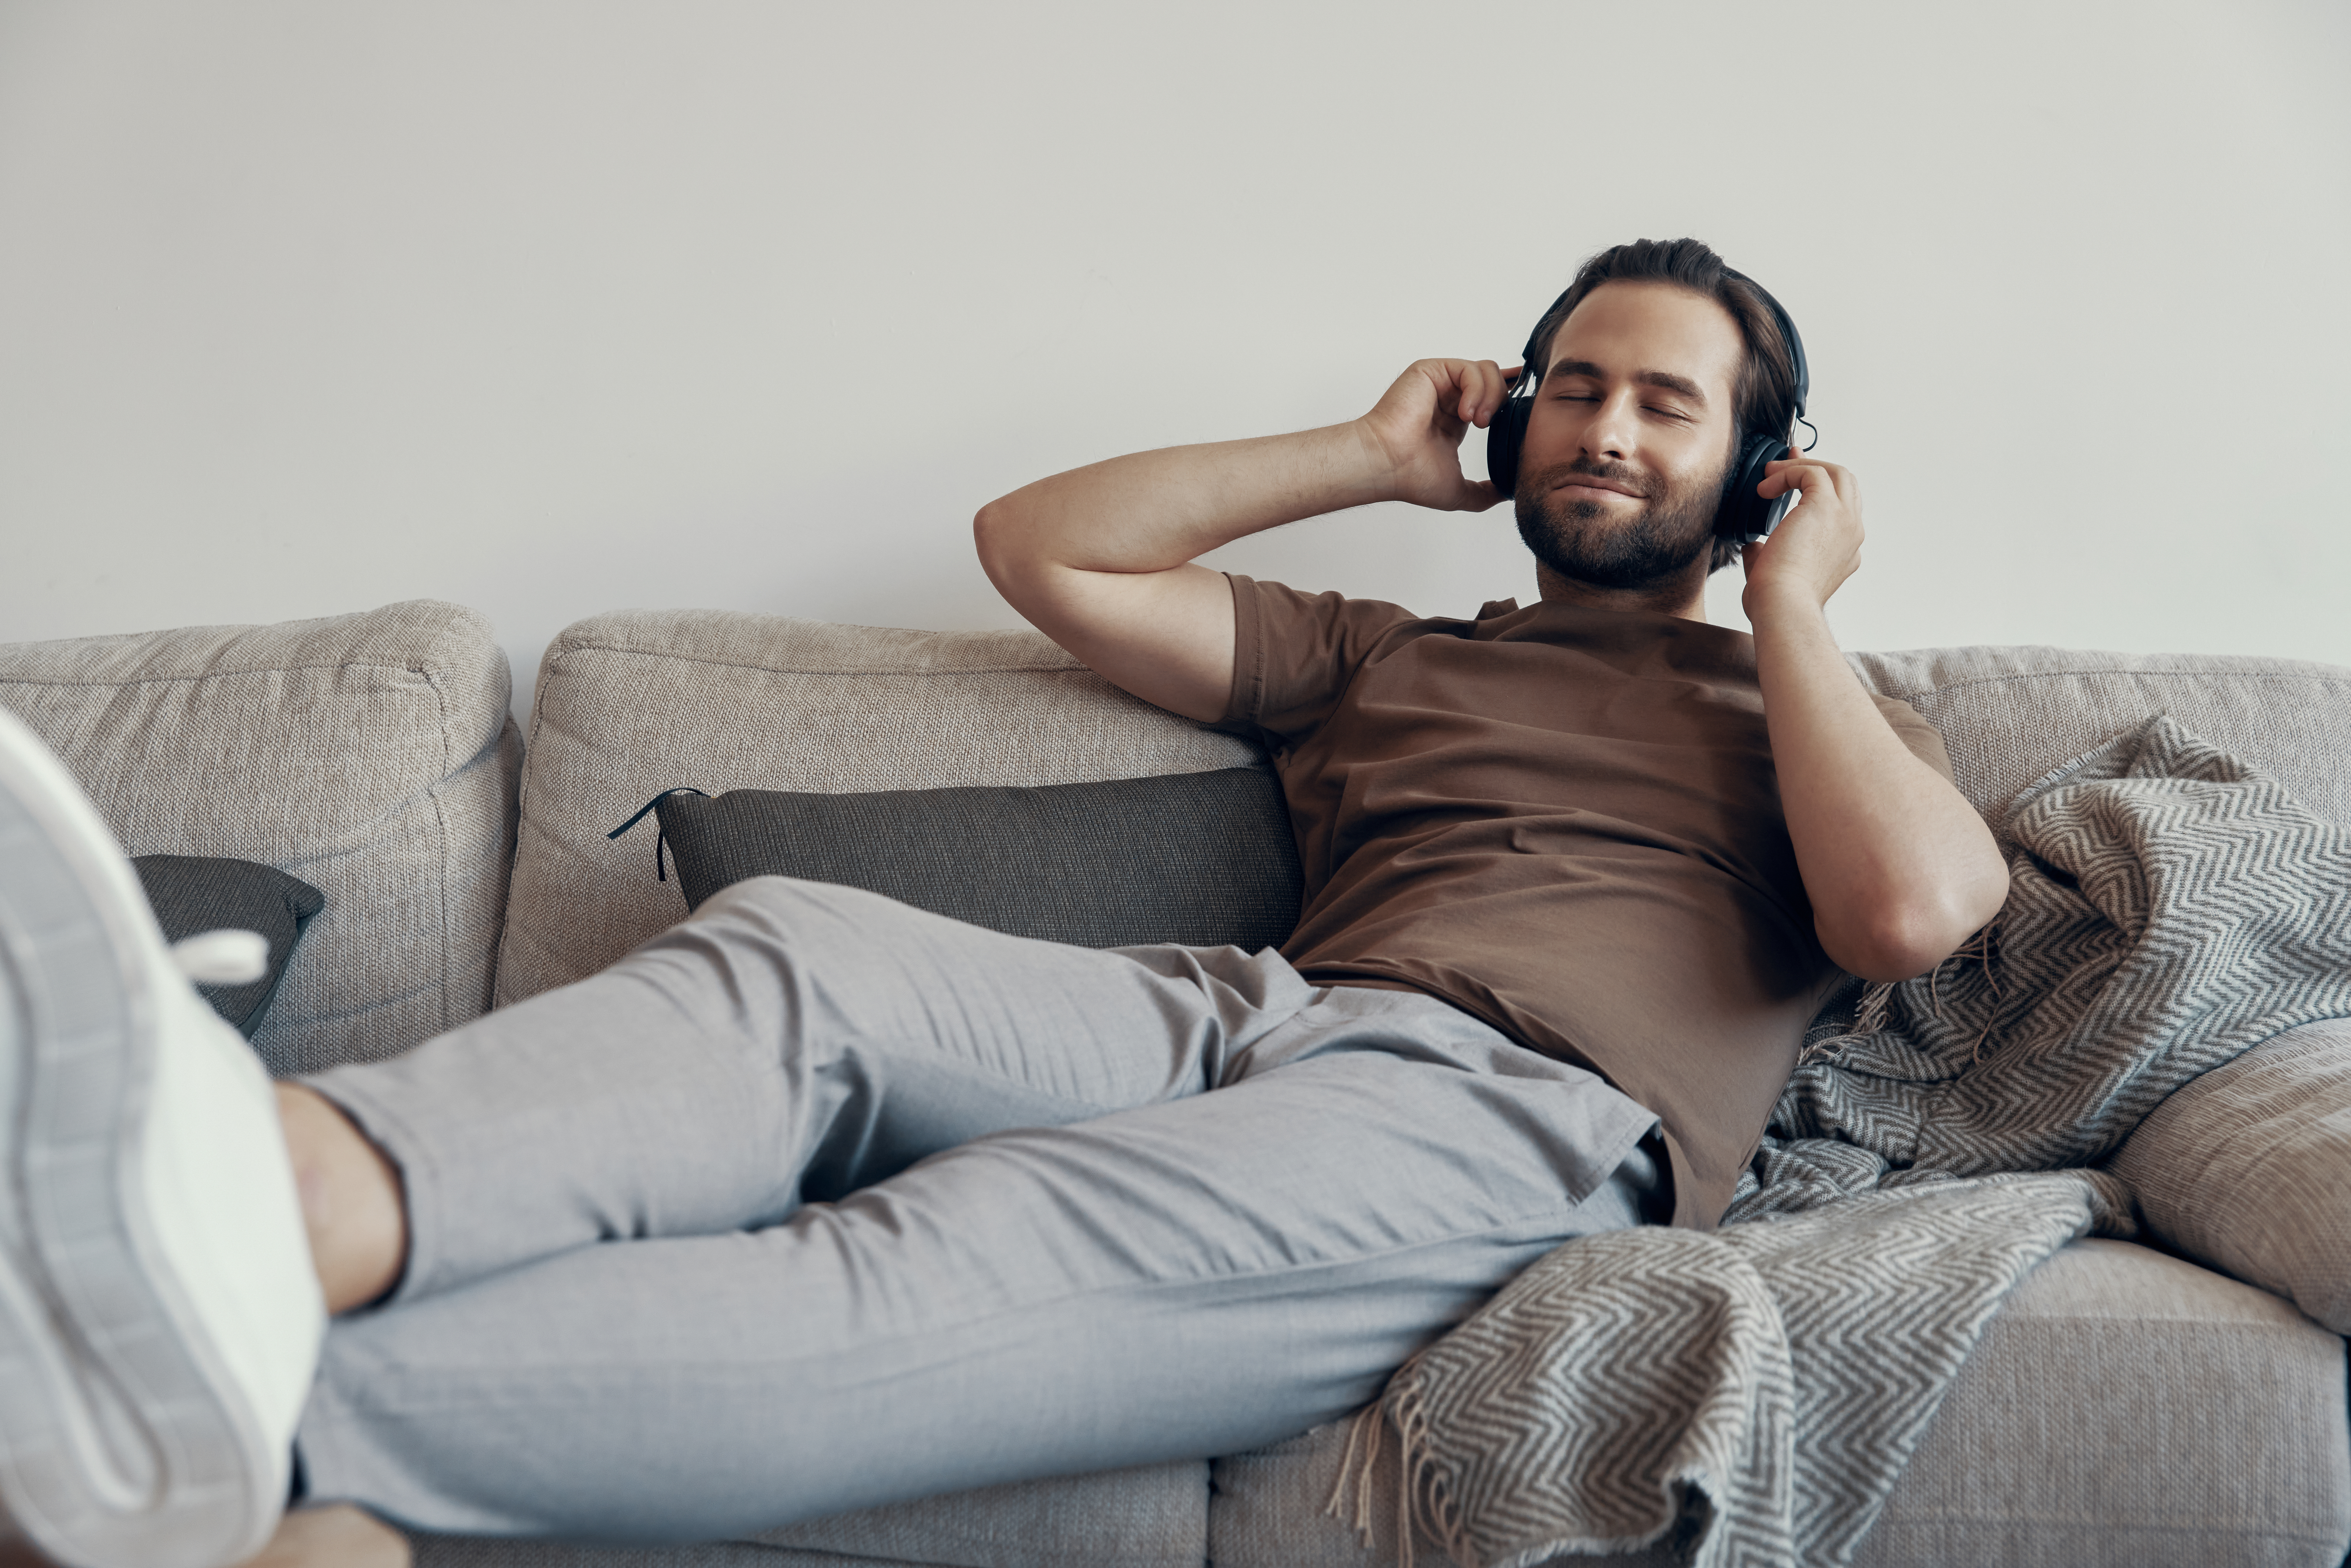 Handsome young man adjusting his headphones while relaxing on the couch at home